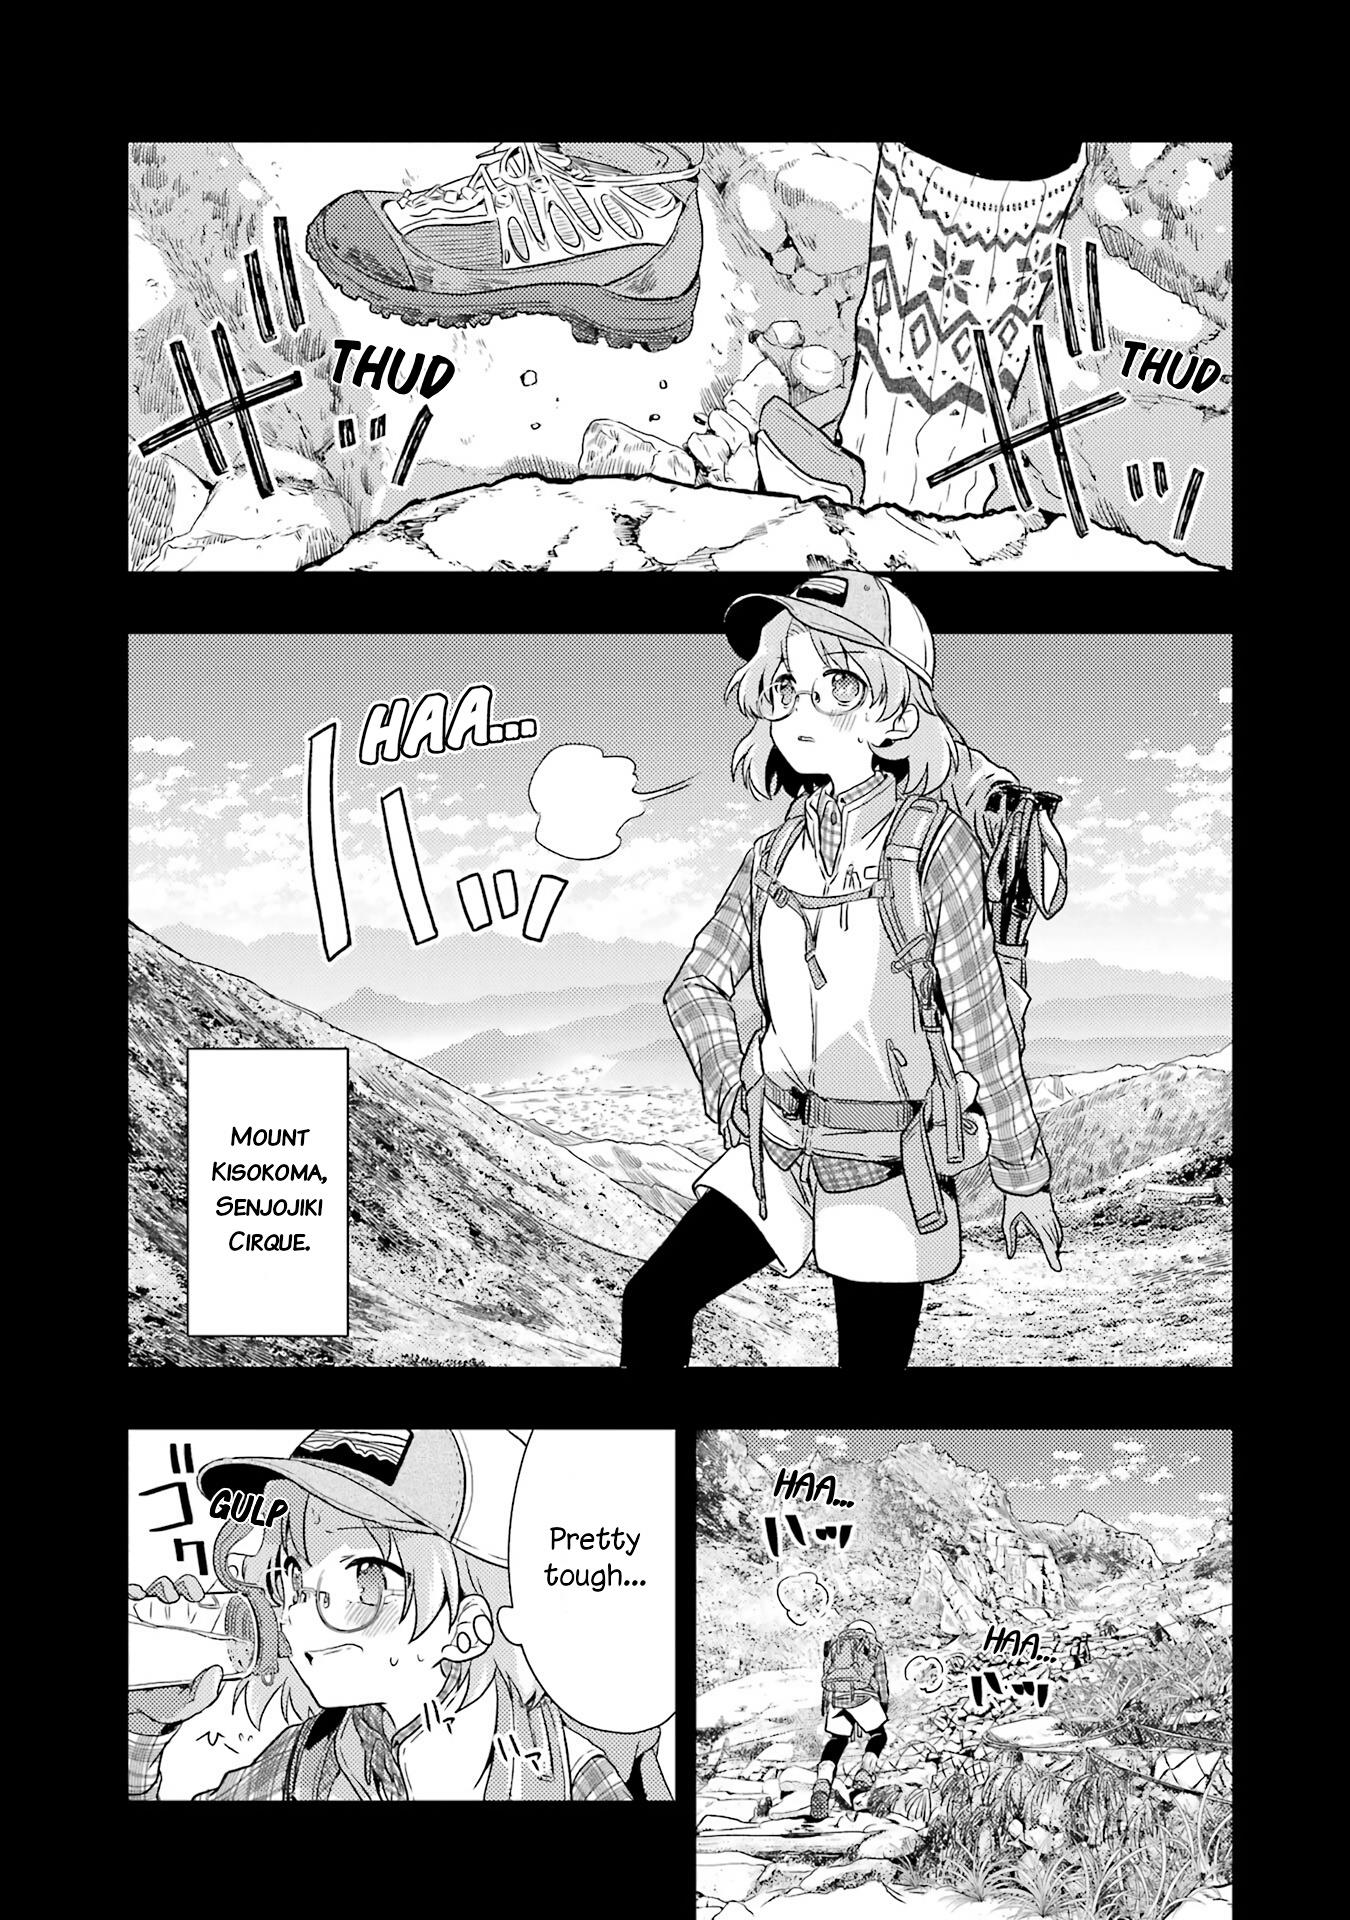 Someya Mako's Mahjong Parlor Food Chapter 26: Cup Noodles - Aiming For The Summit - Picture 1